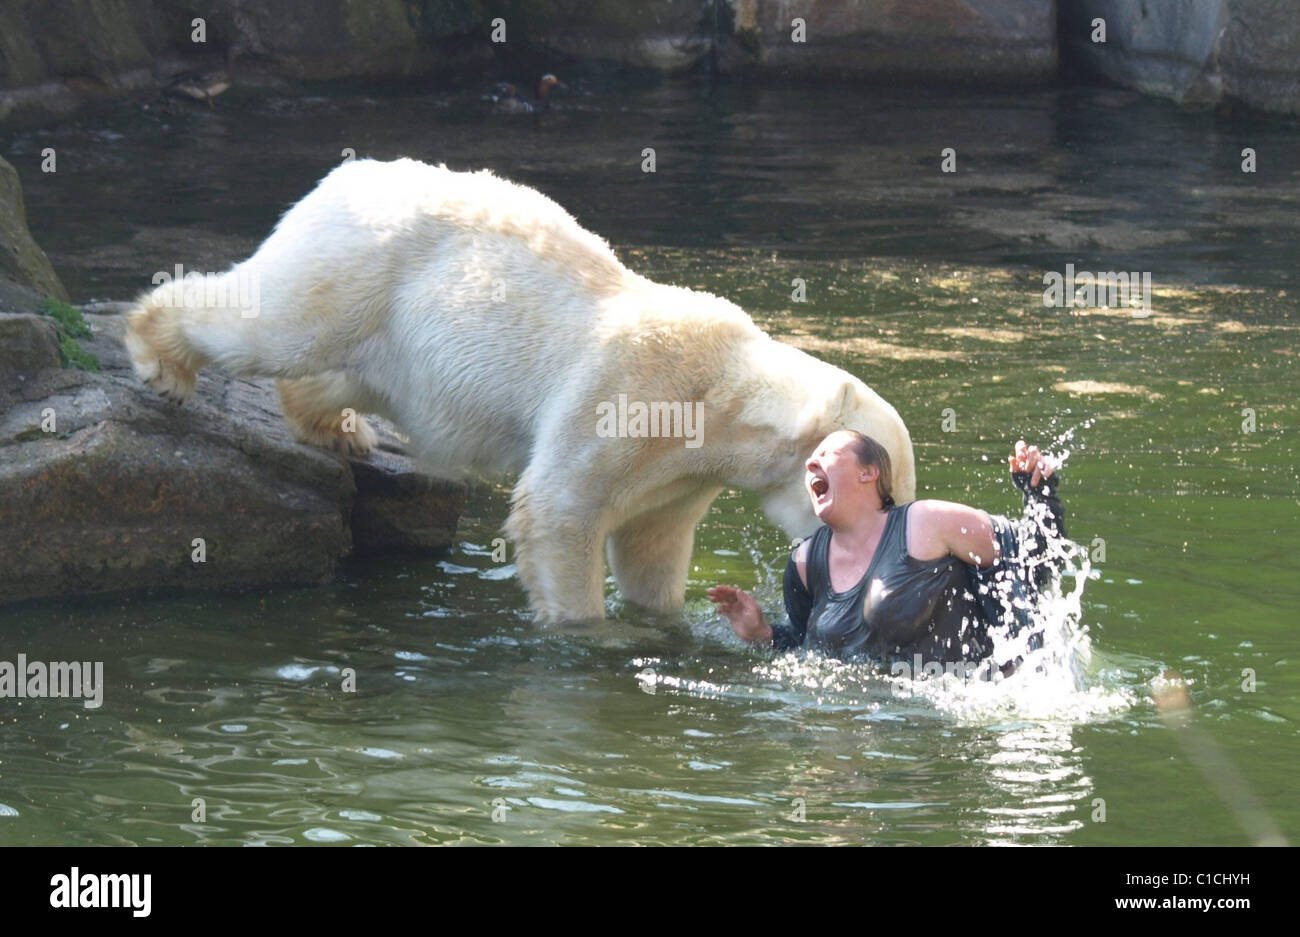 DERANGED WOMAN IN BEAR DRAMA These are the amazing scenes at a zoo on Friday (10Apr09), where a woman jumped into a polar bear Stock Photo